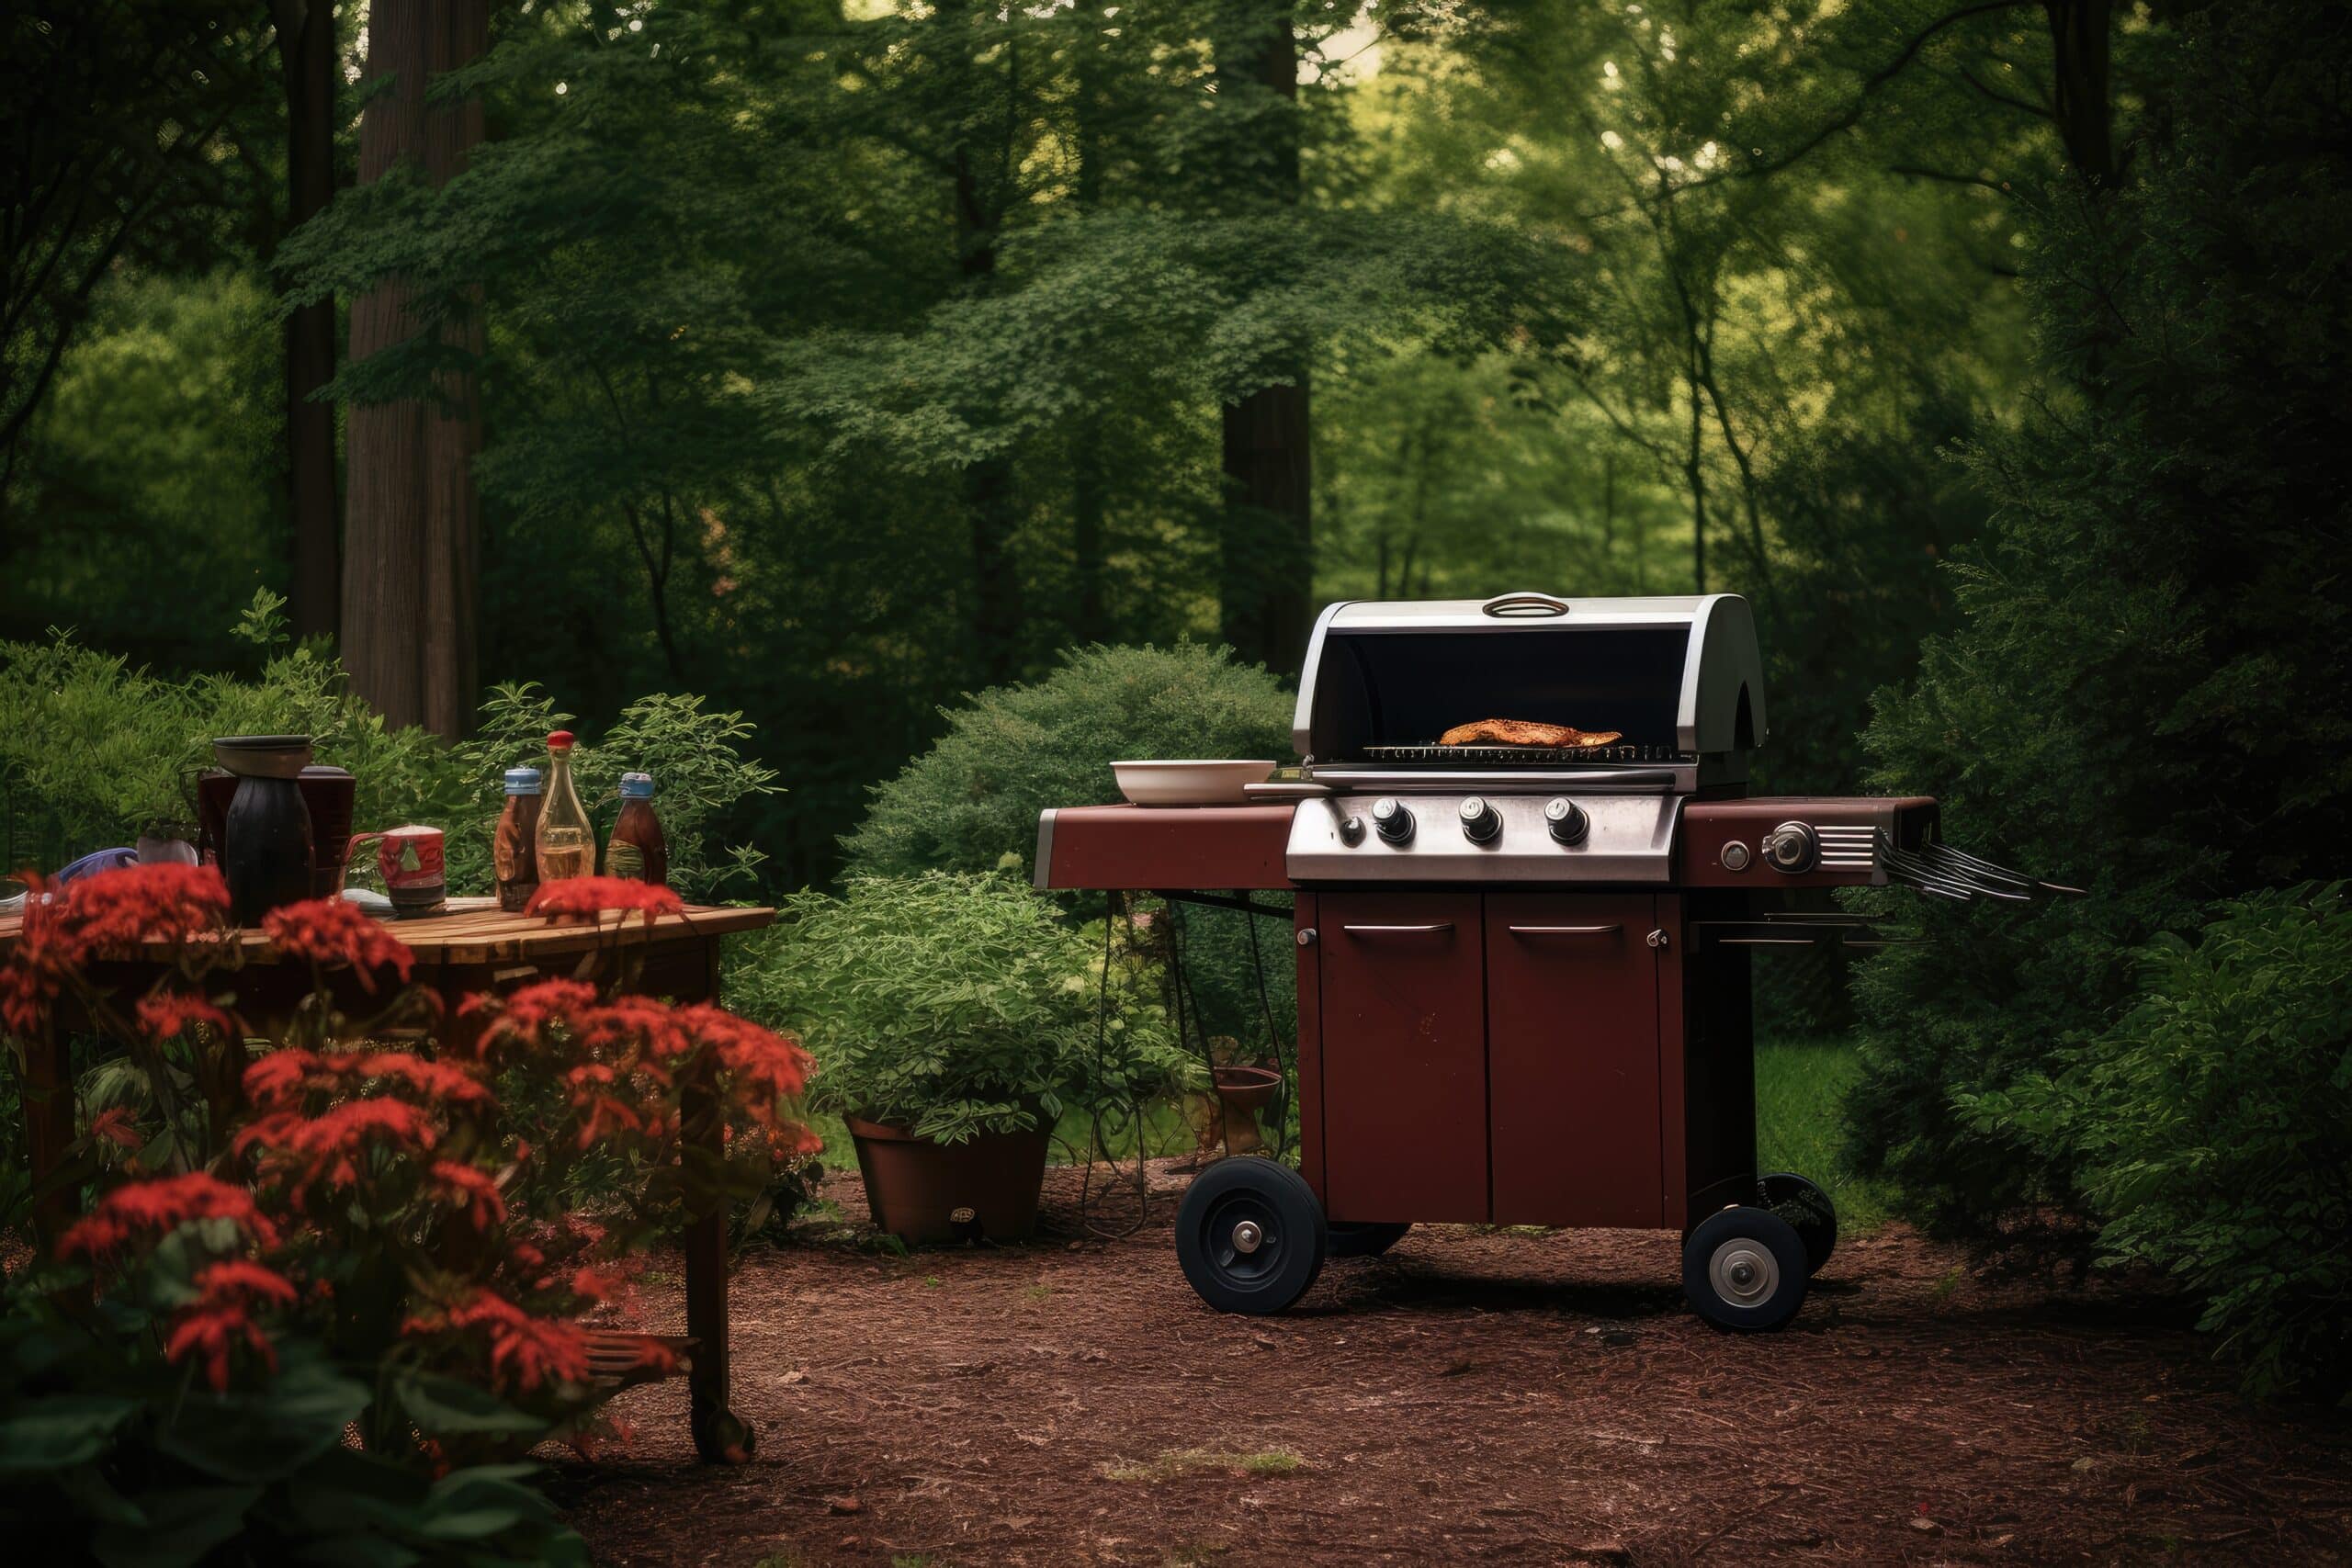 www.appr.com : Can You Convert A Natural Gas Grill To Propane?